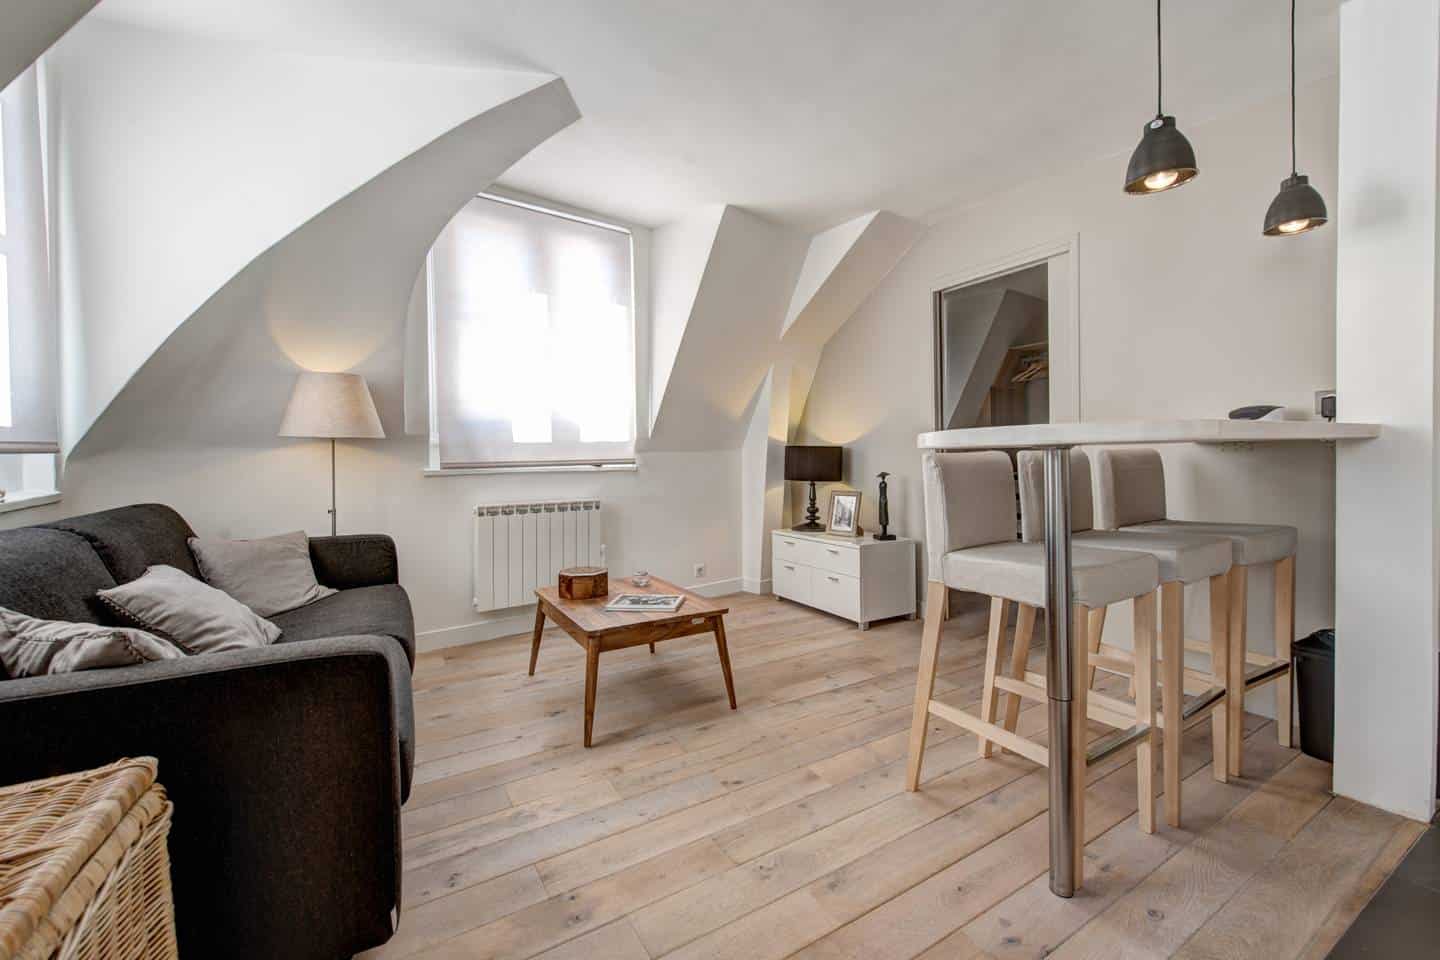 Wow! This Airbnb Paris listing near Latin Quarter is dreamy. You have to see the pictures!